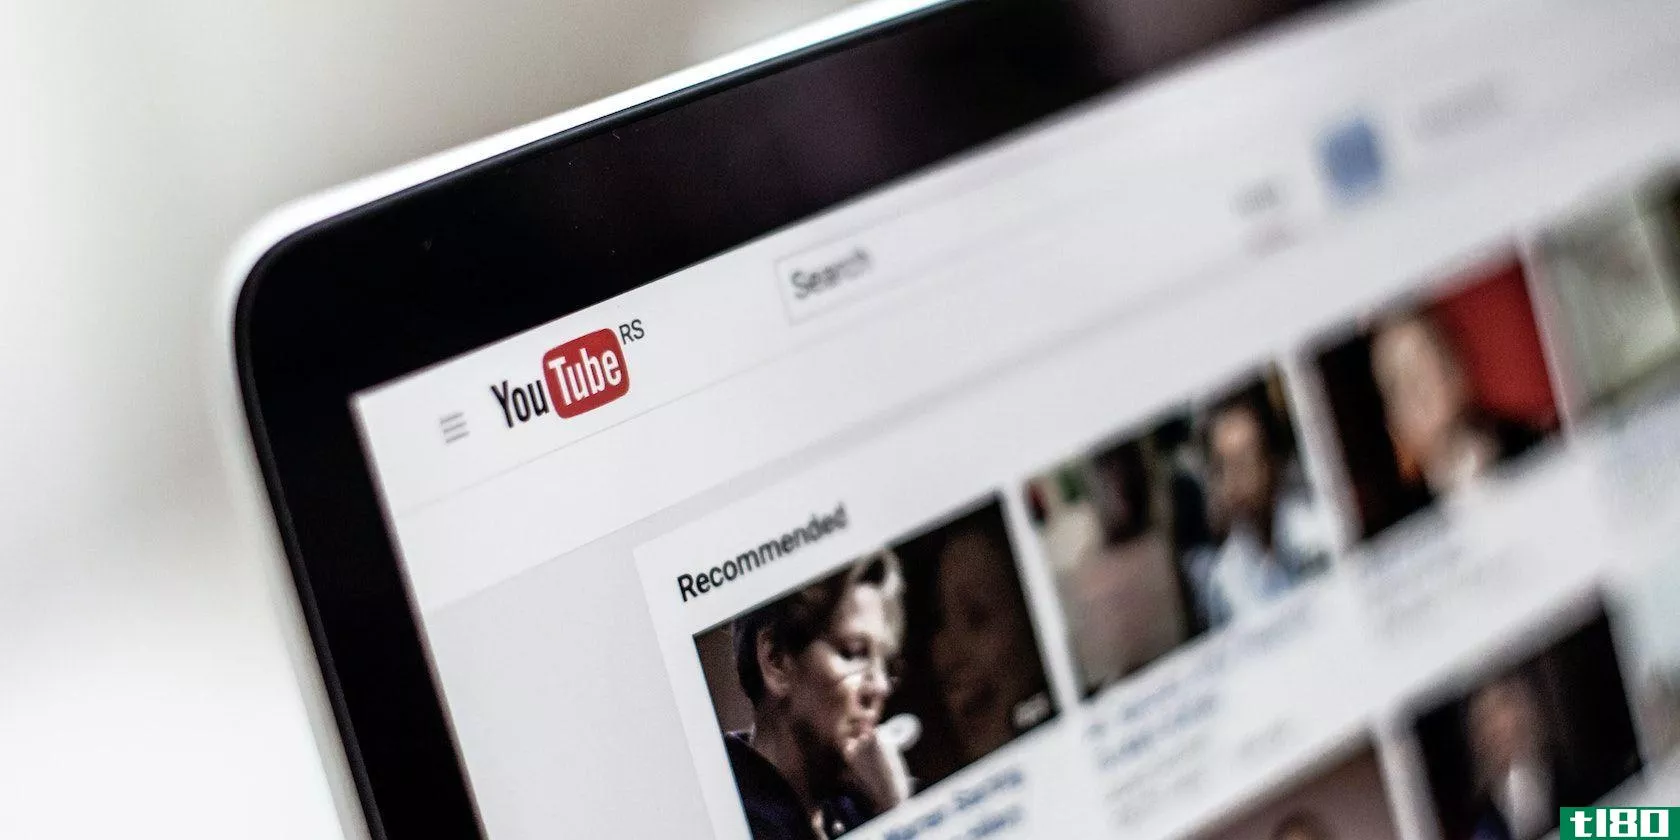 A photograph of a laptop screen displaying YouTube